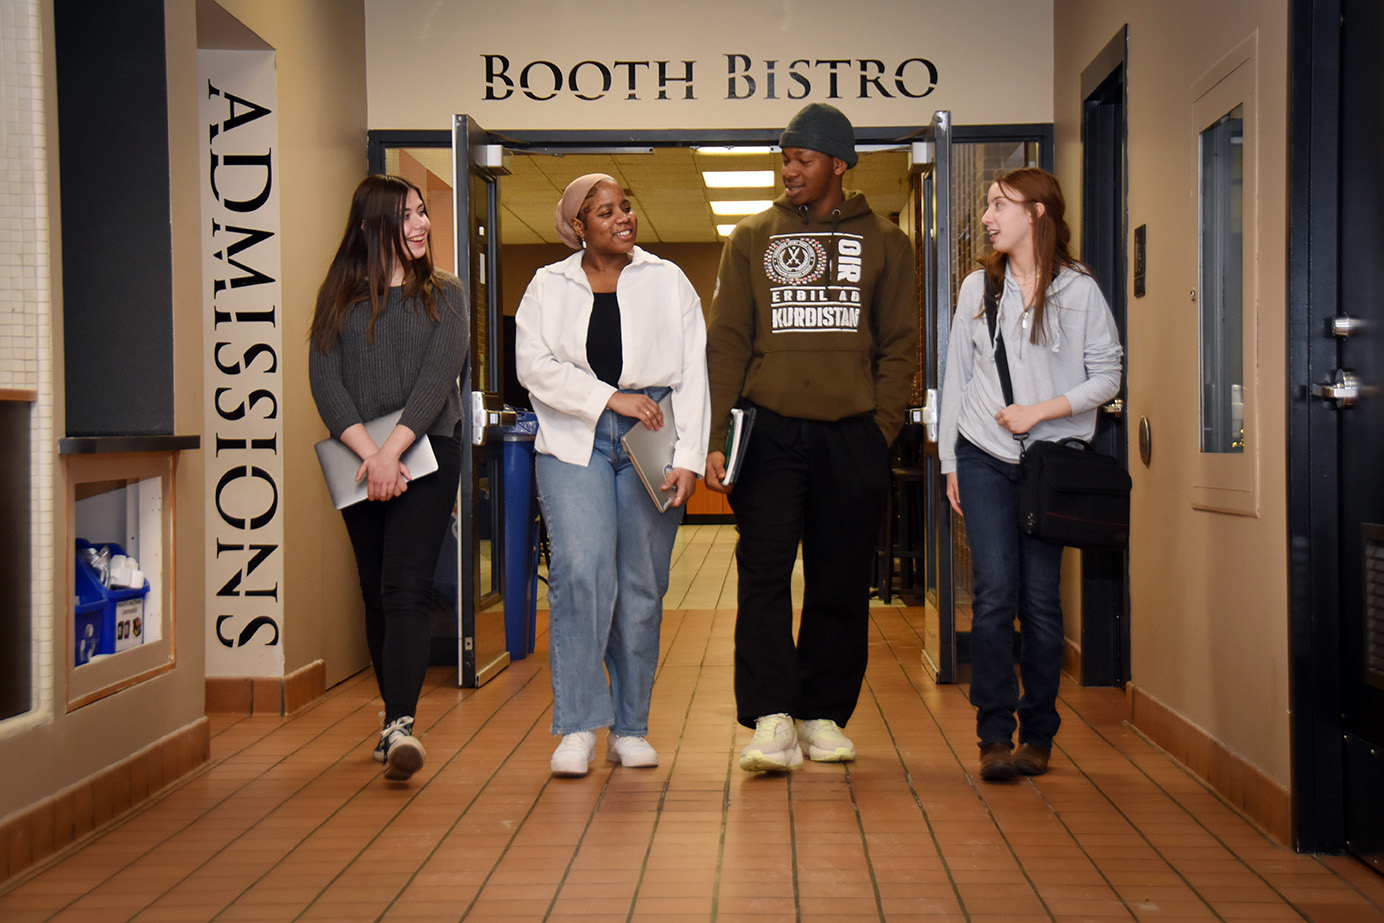 Four students holding textbooks walk together down the hallway.